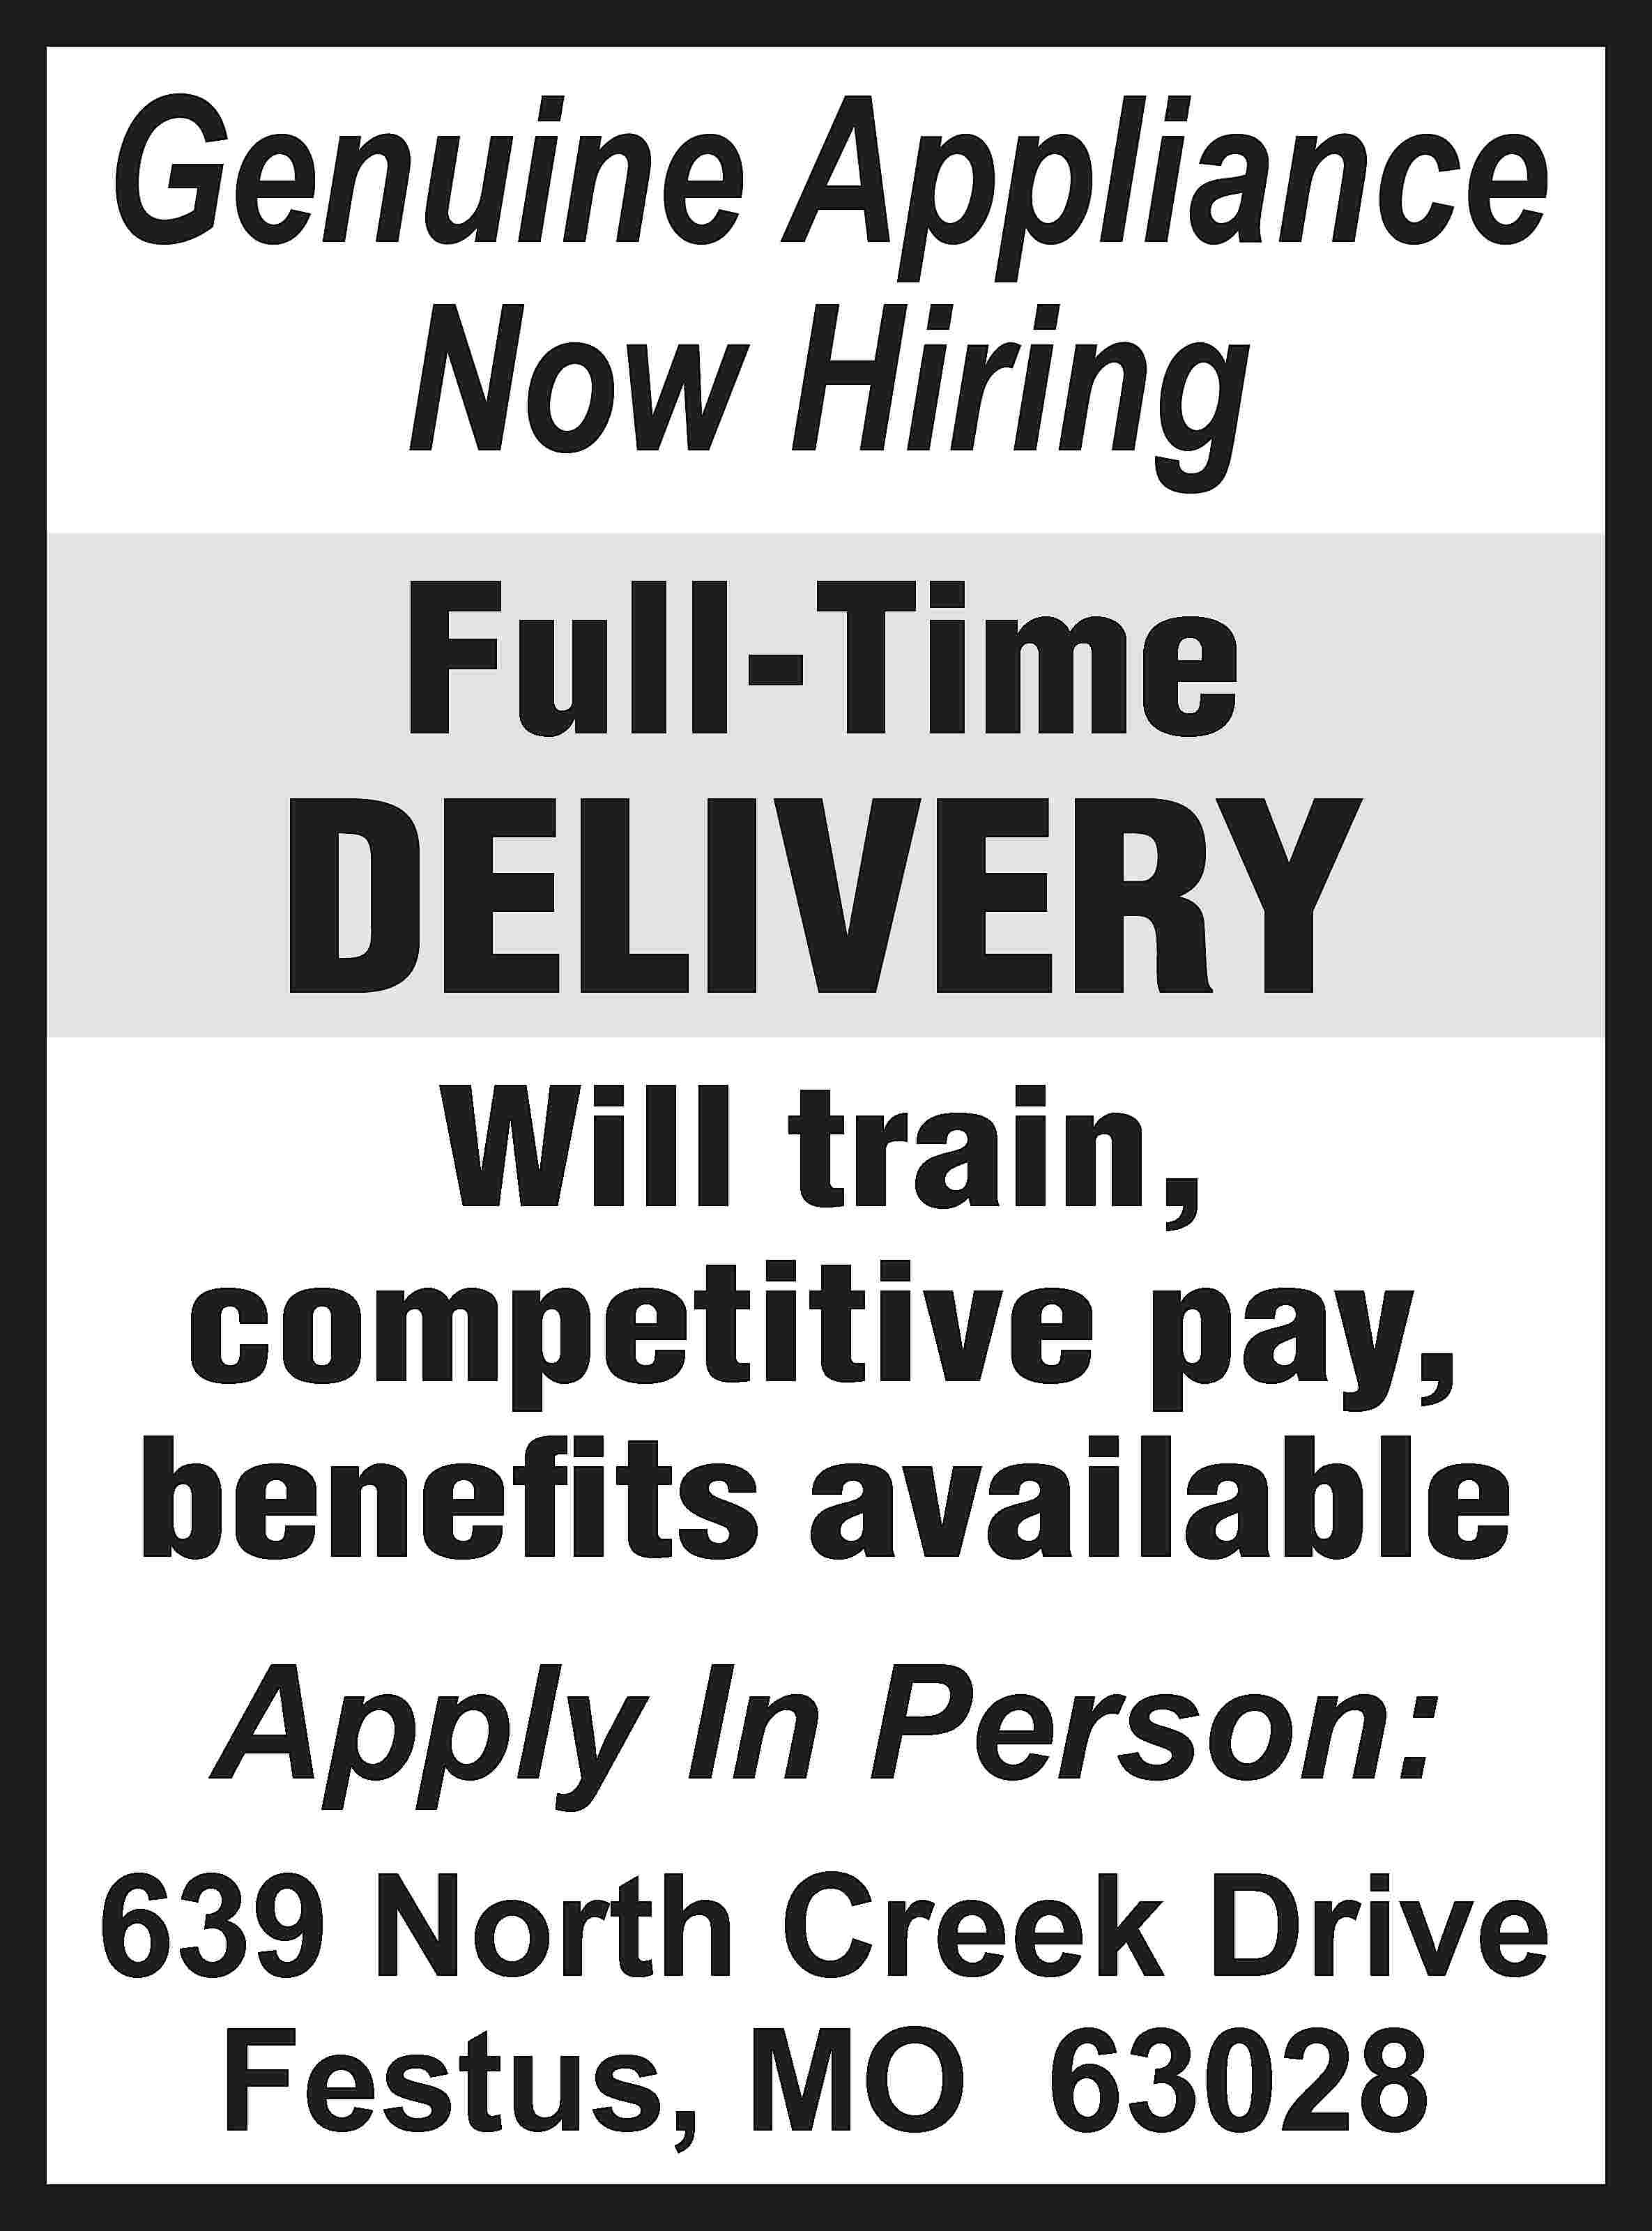 Genuine Appliance Now Hiring Full-Time  Genuine Appliance Now Hiring Full-Time DELIVERY Will train, competitive pay, benefits available Apply In Person: 639 North Creek Drive Festus, MO 63028